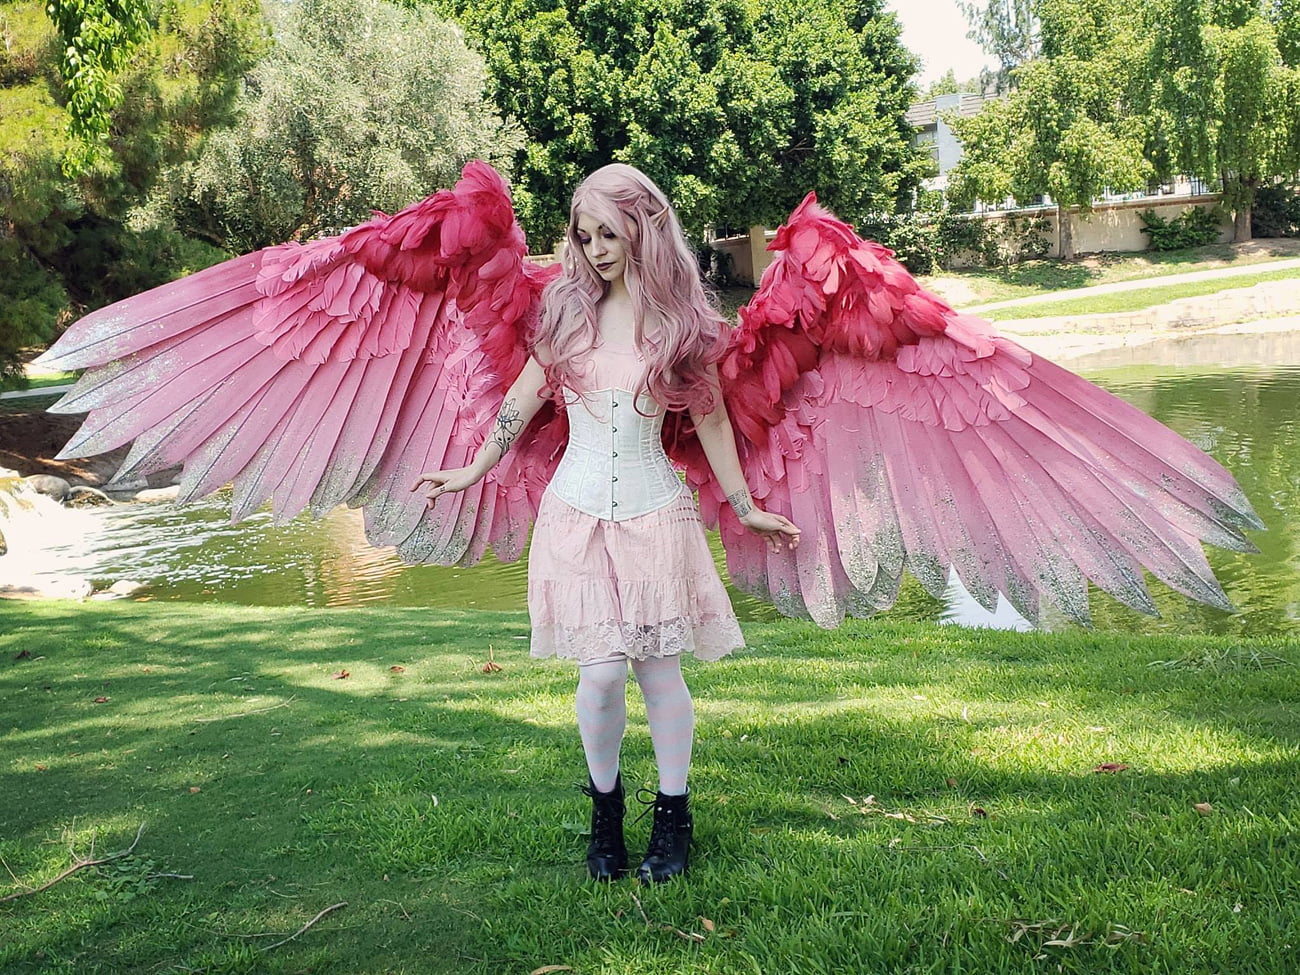 Alexis Noriega’s Giant Feathered Wings